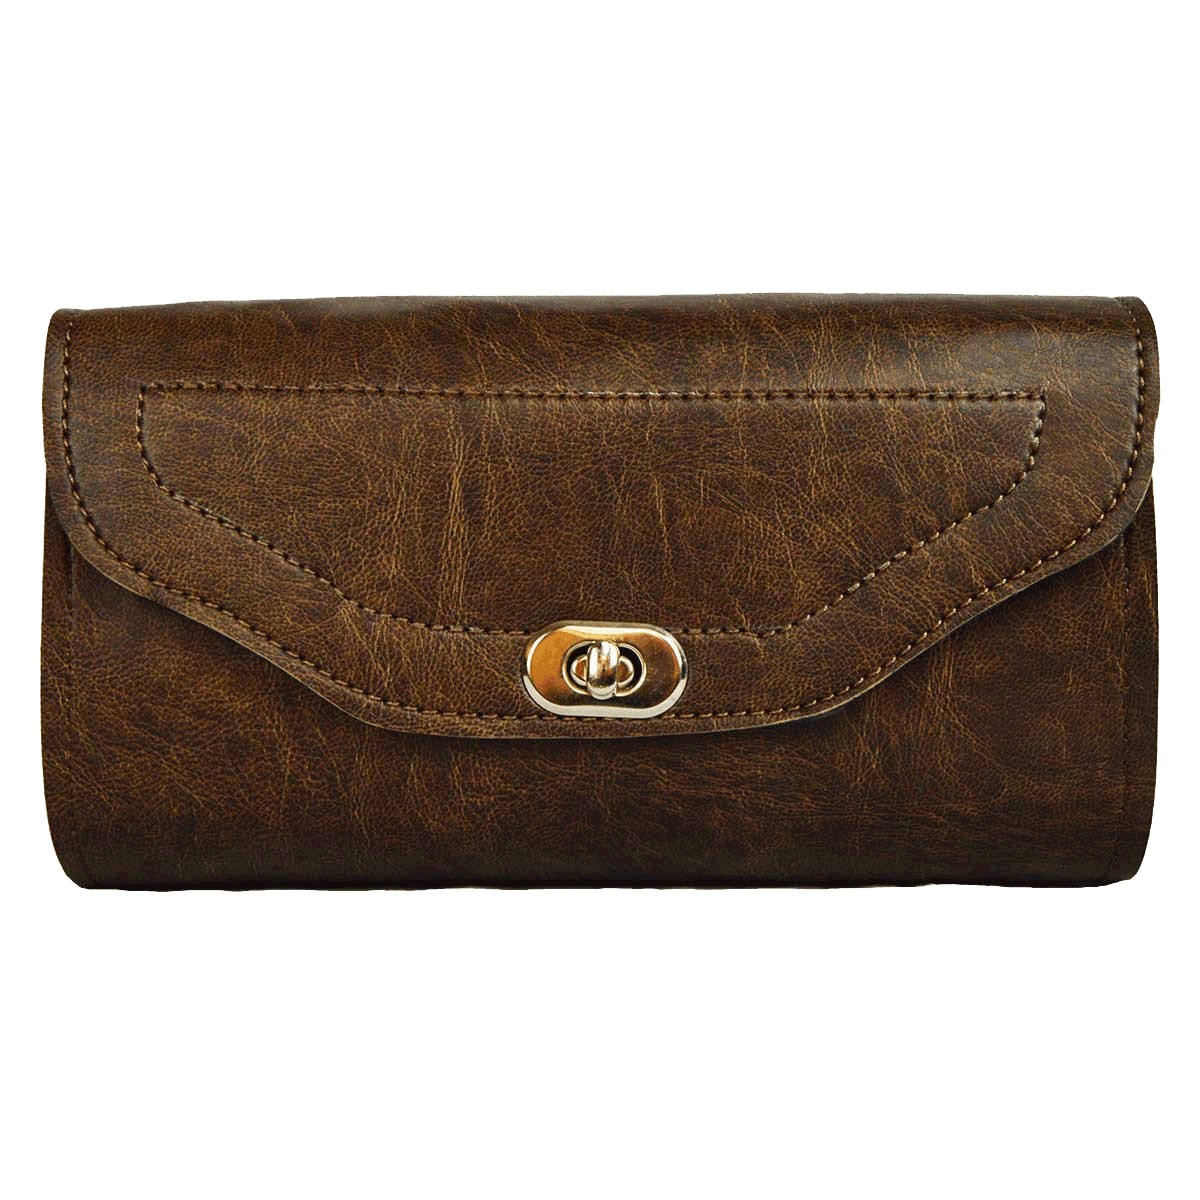 Brown Briefcase PNG HD Quality